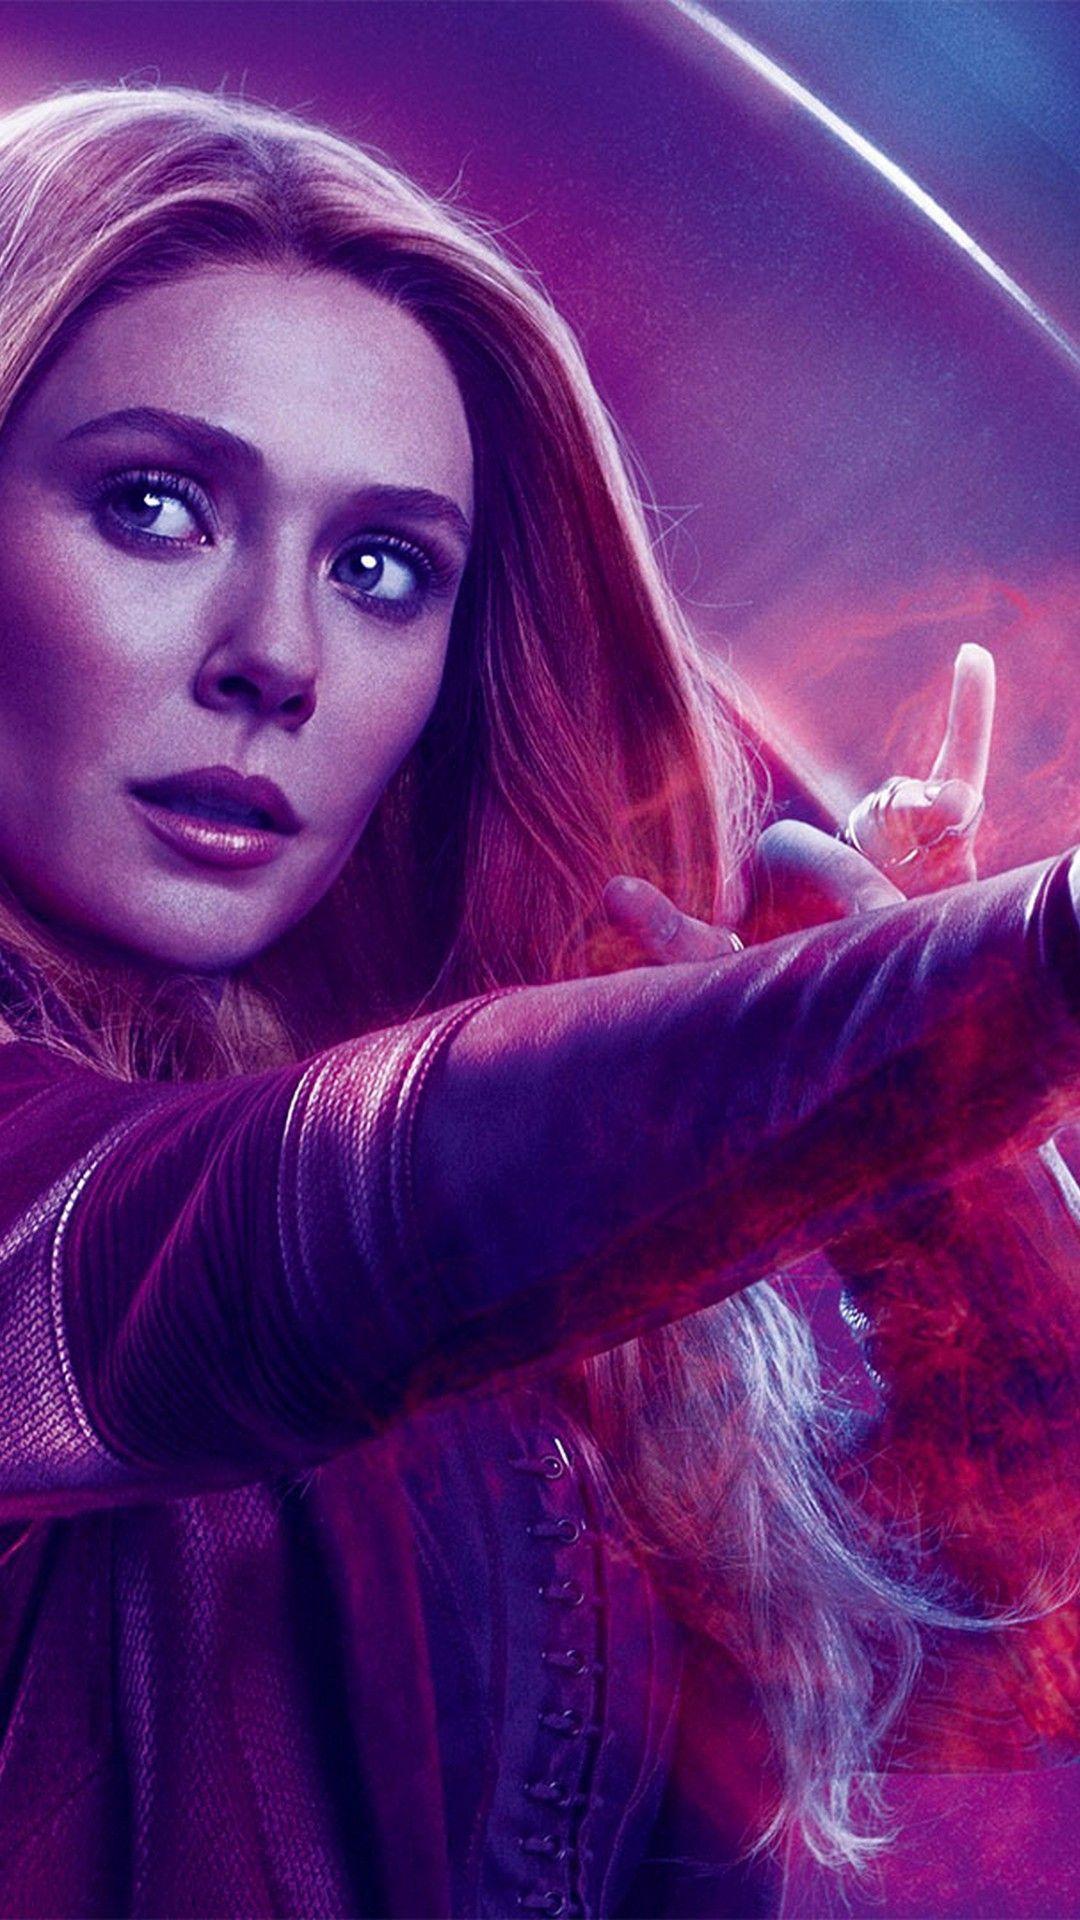 Avengers Scarlet Witch Wallpapers - Top Free Avengers Scarlet Witch ...